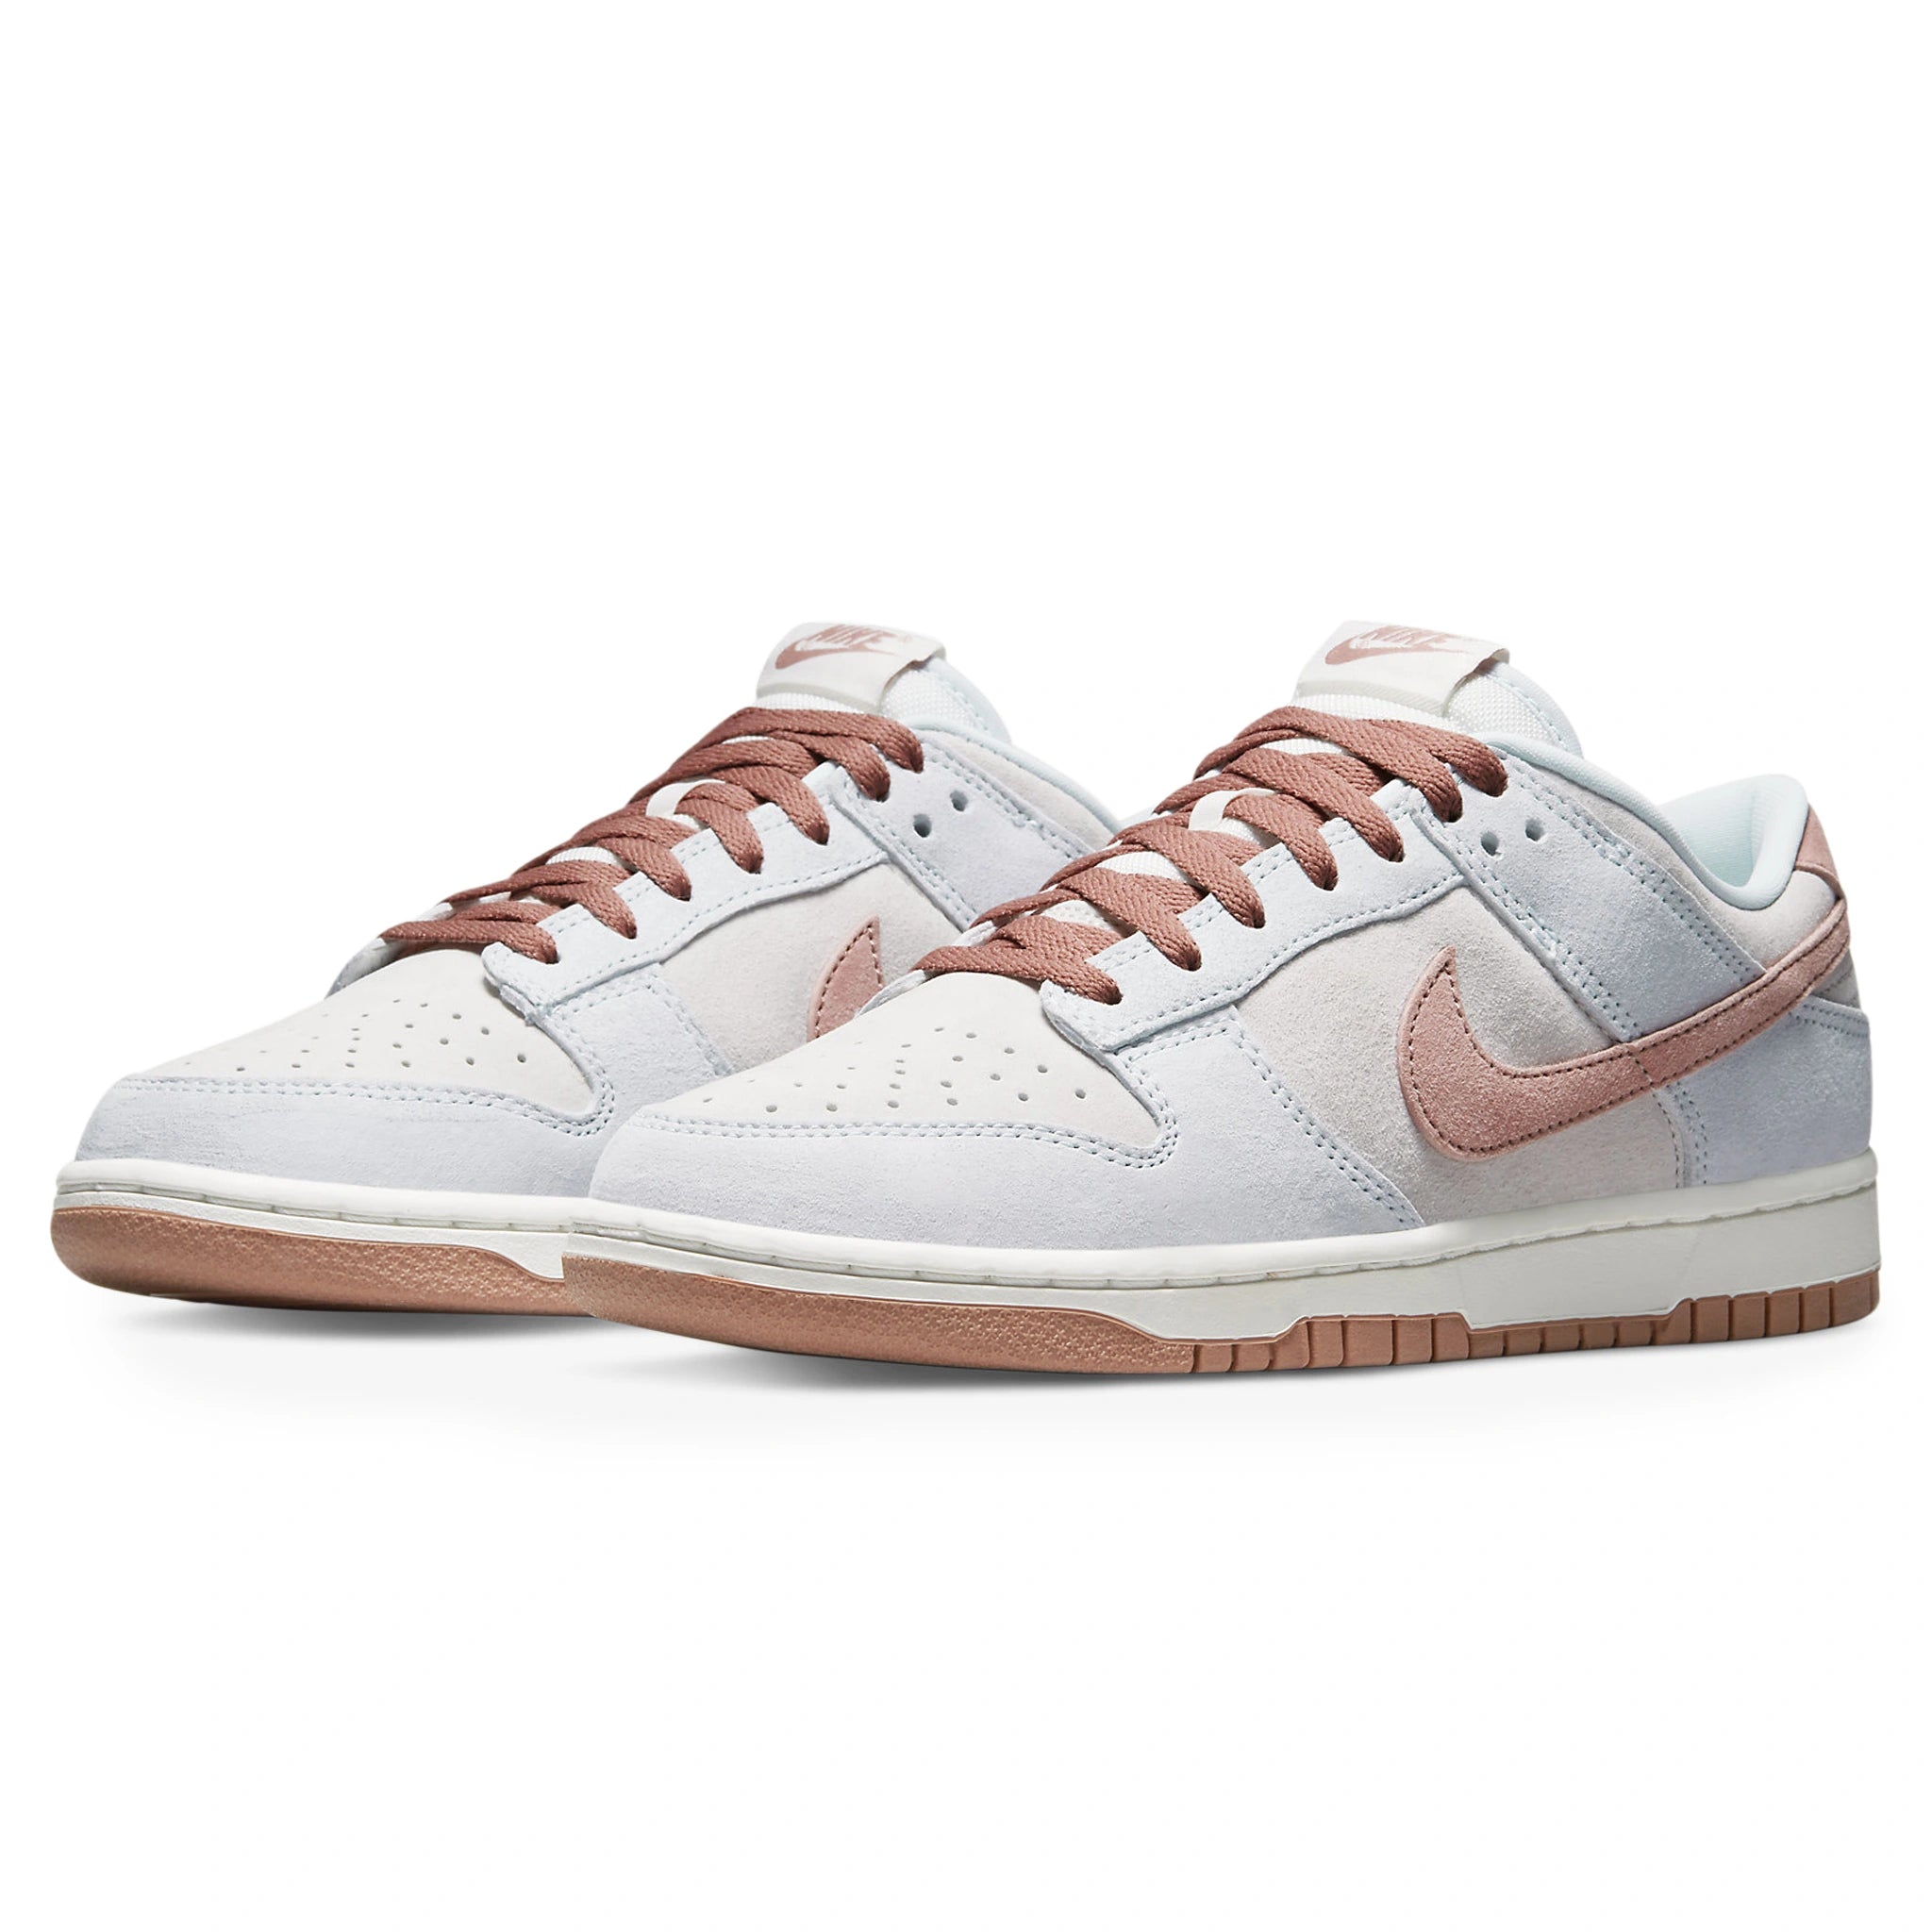 Front side view of Nike Dunk Low Fossil Rose DH7577-001